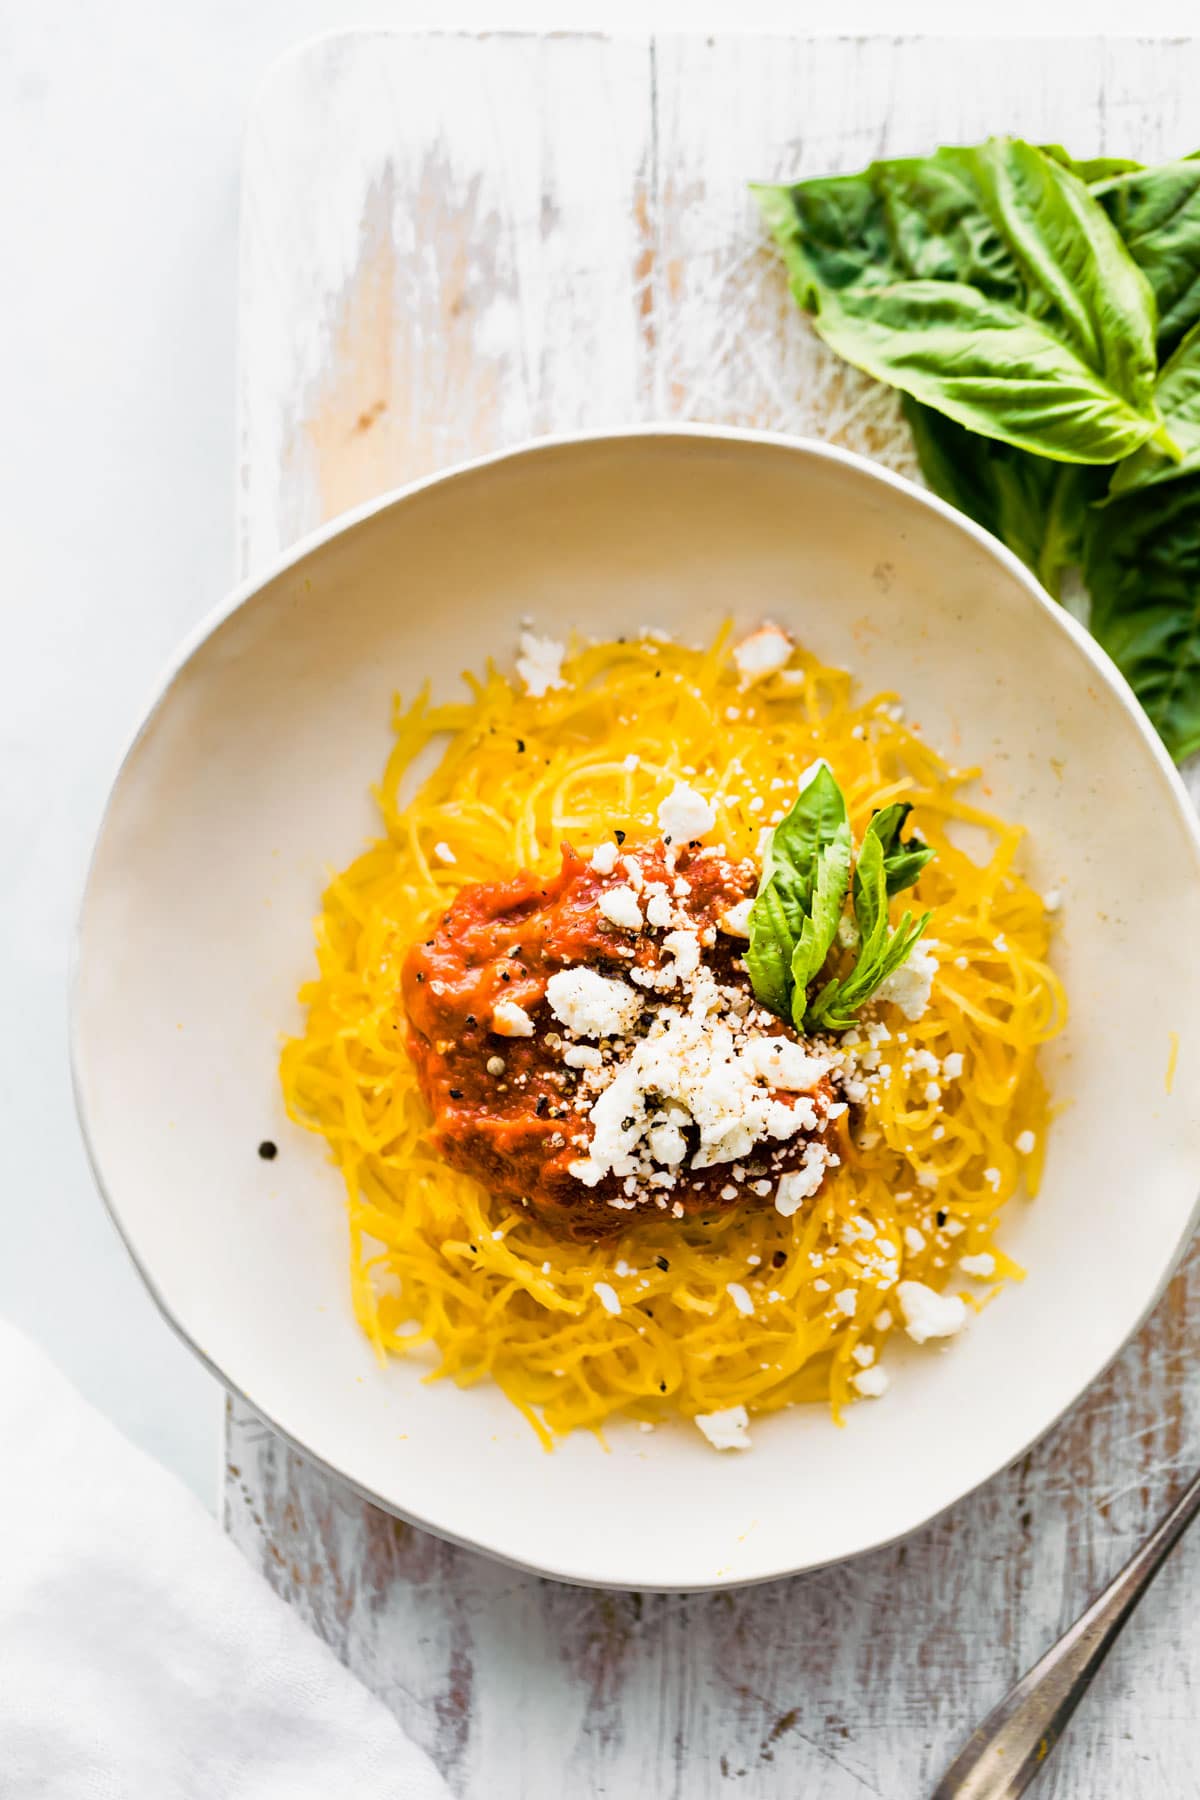 Instant pot spaghetti squash noodles with nightshade free tomato sauce